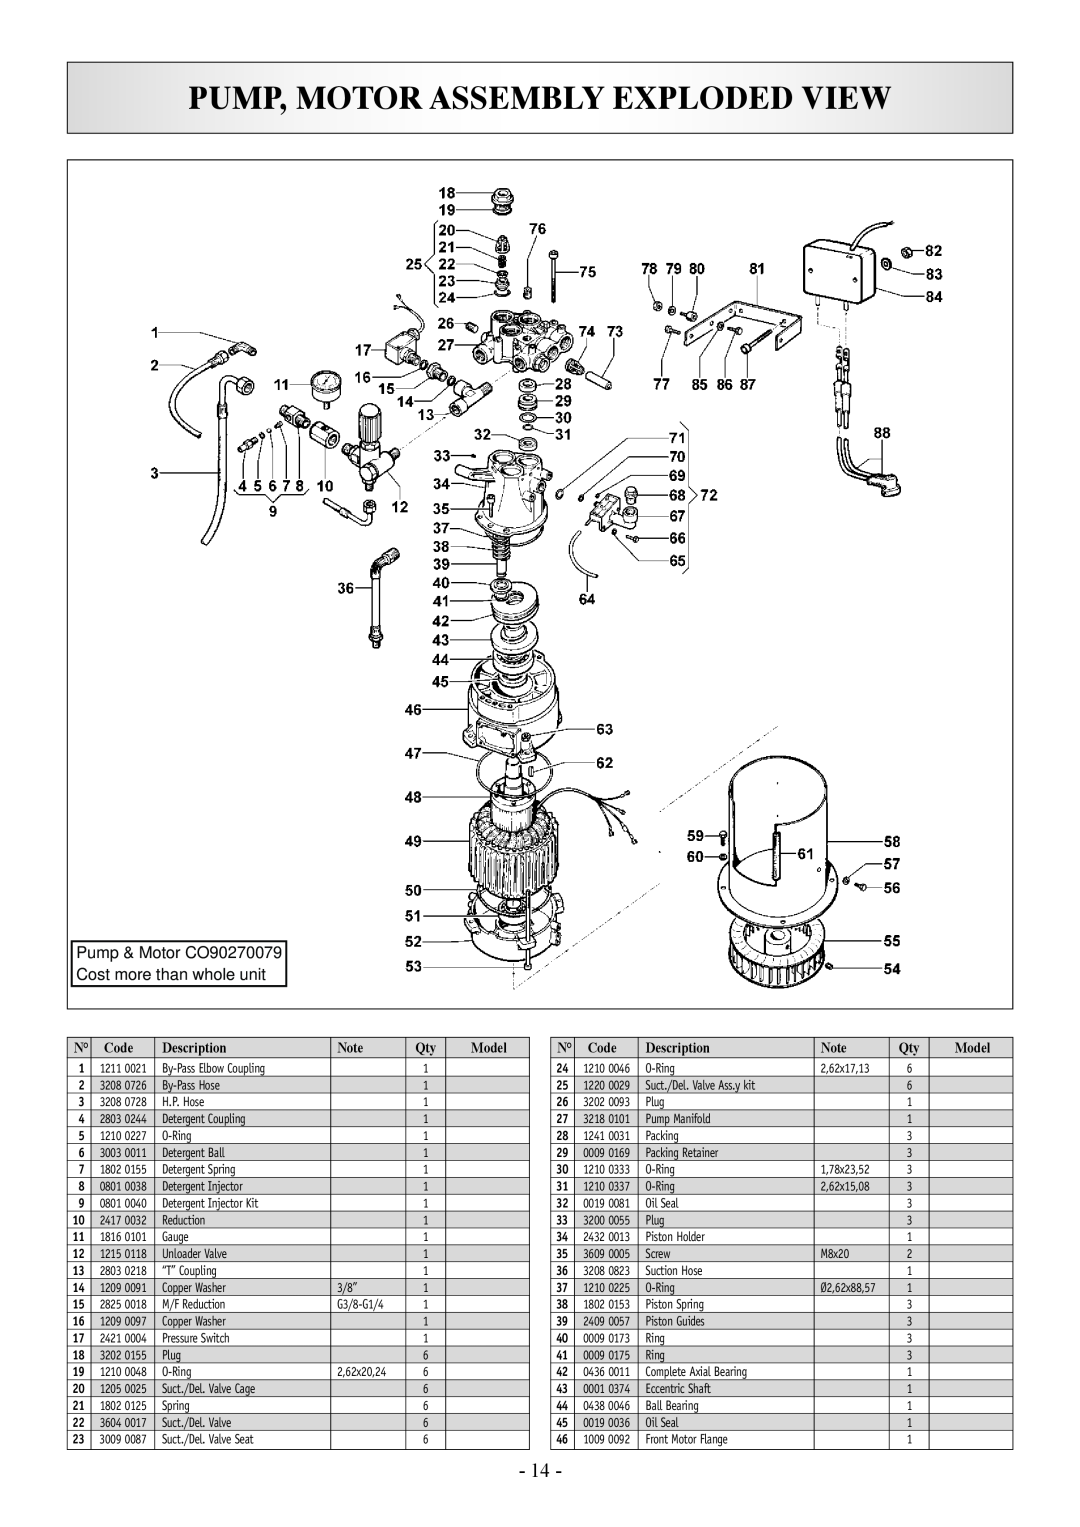 North Star 157394 Pump, Motor Assembly Exploded View, Pump & Motor CO90270079 Cost more than whole unit, Code, Description 